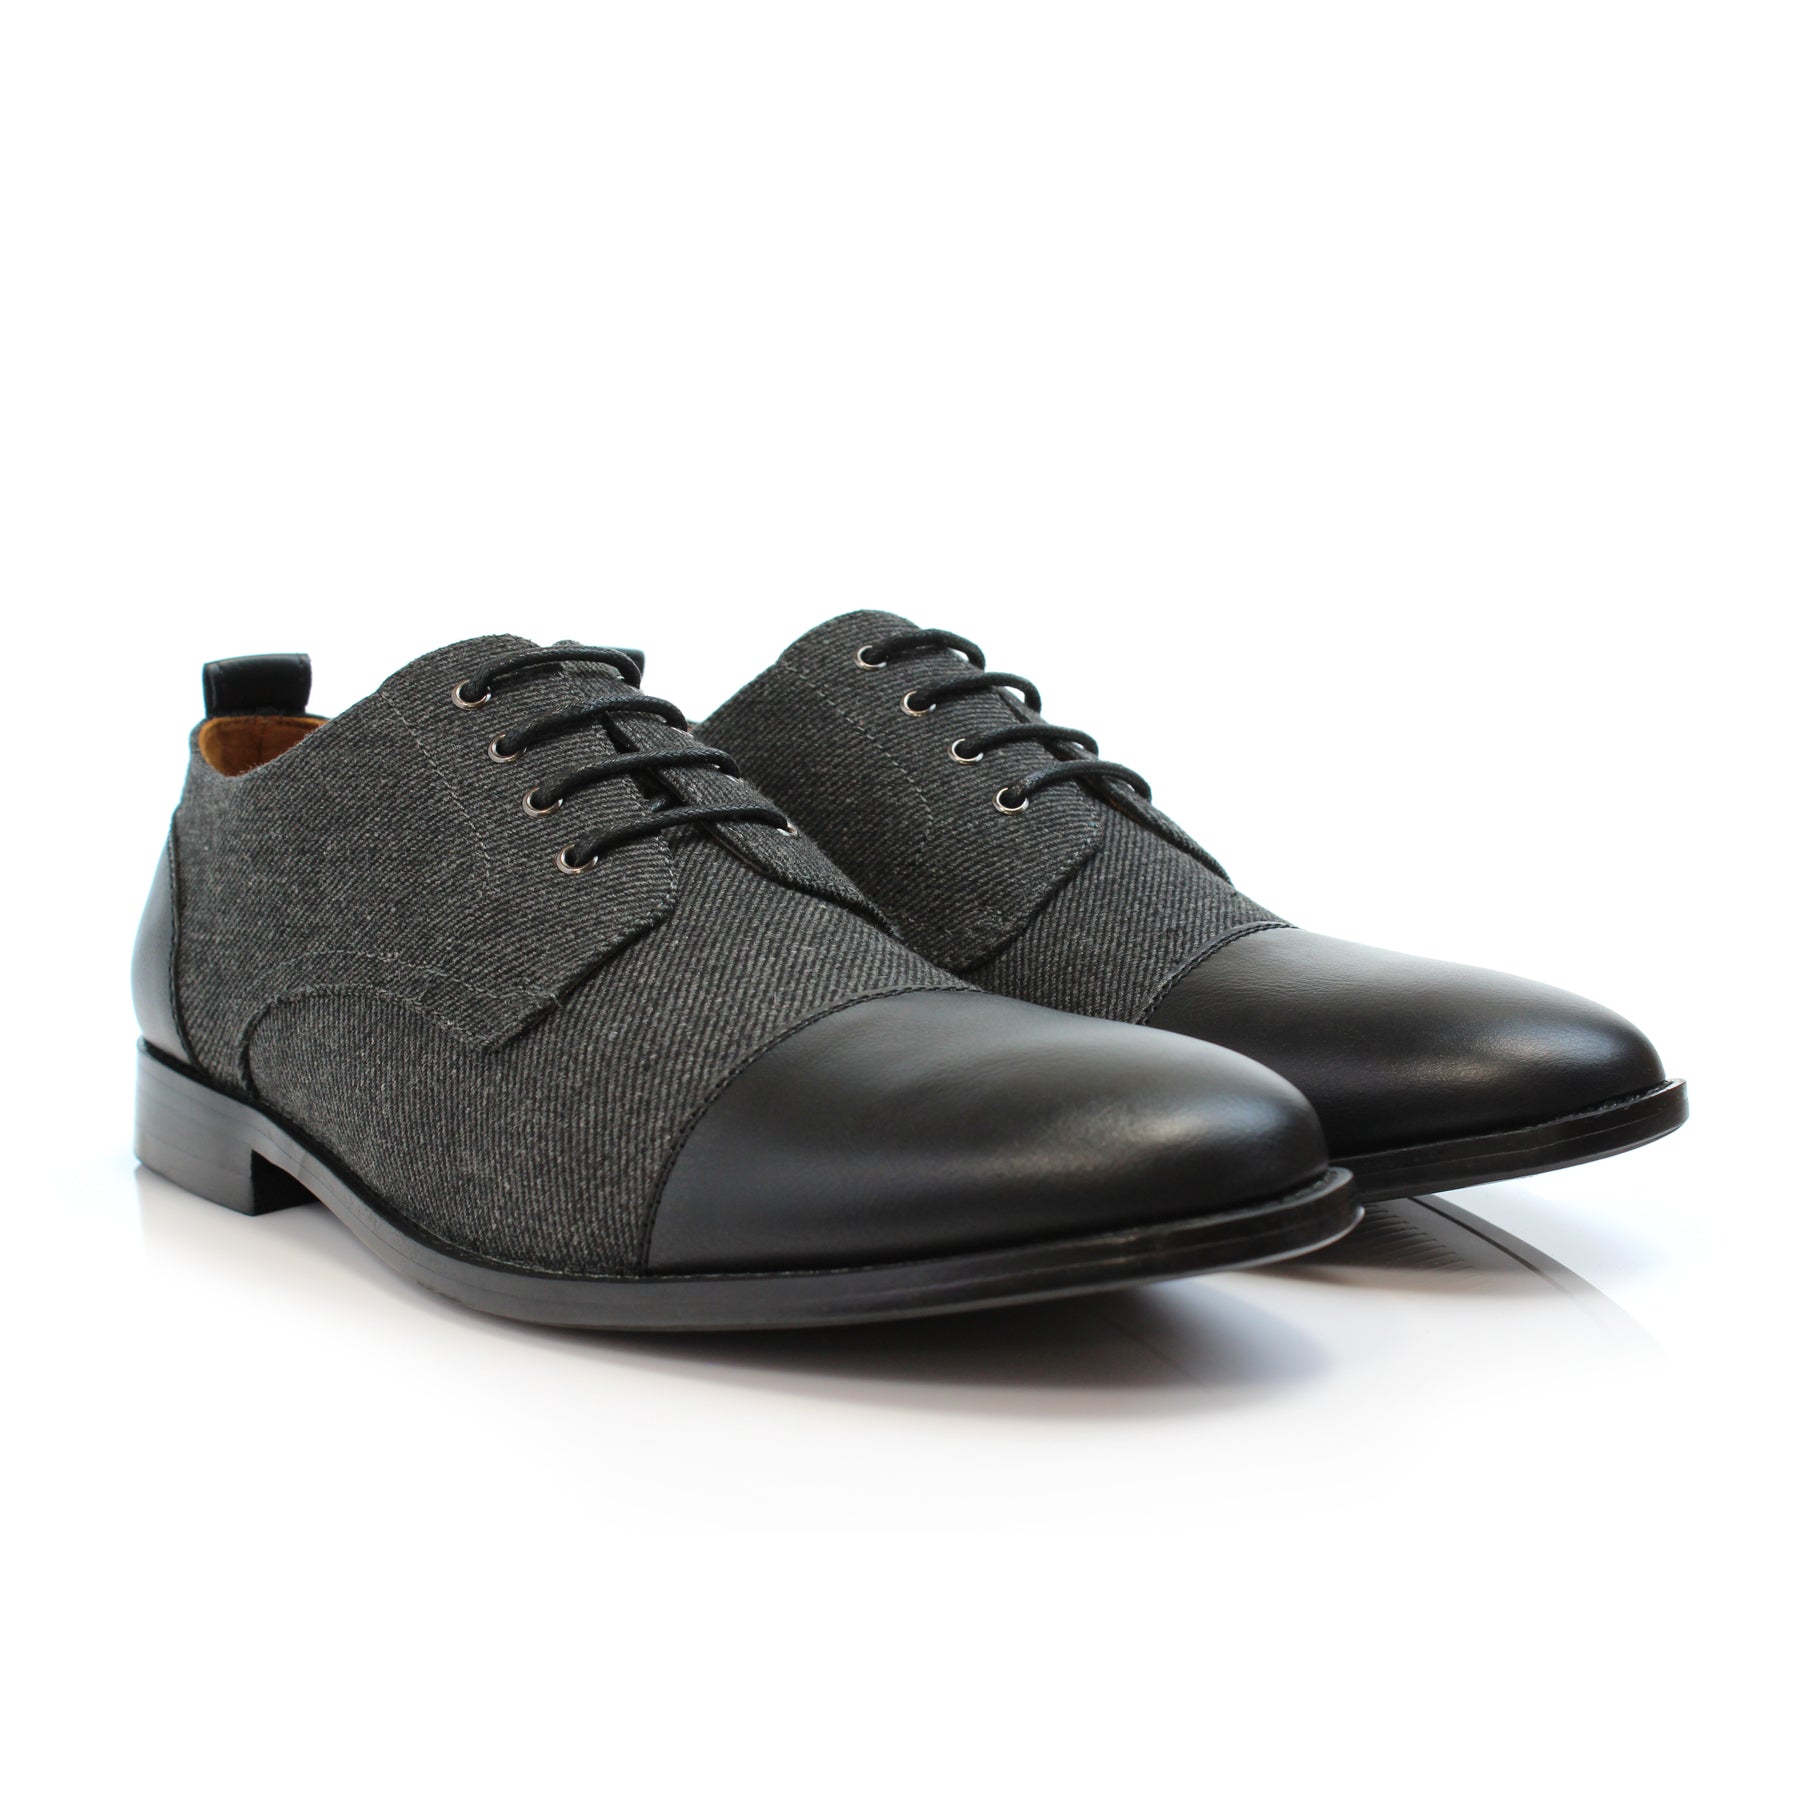 Duo-textured Woolen Derby Dress Shoes | Clifford by Polar Fox | Conal Footwear | Paired Angle View